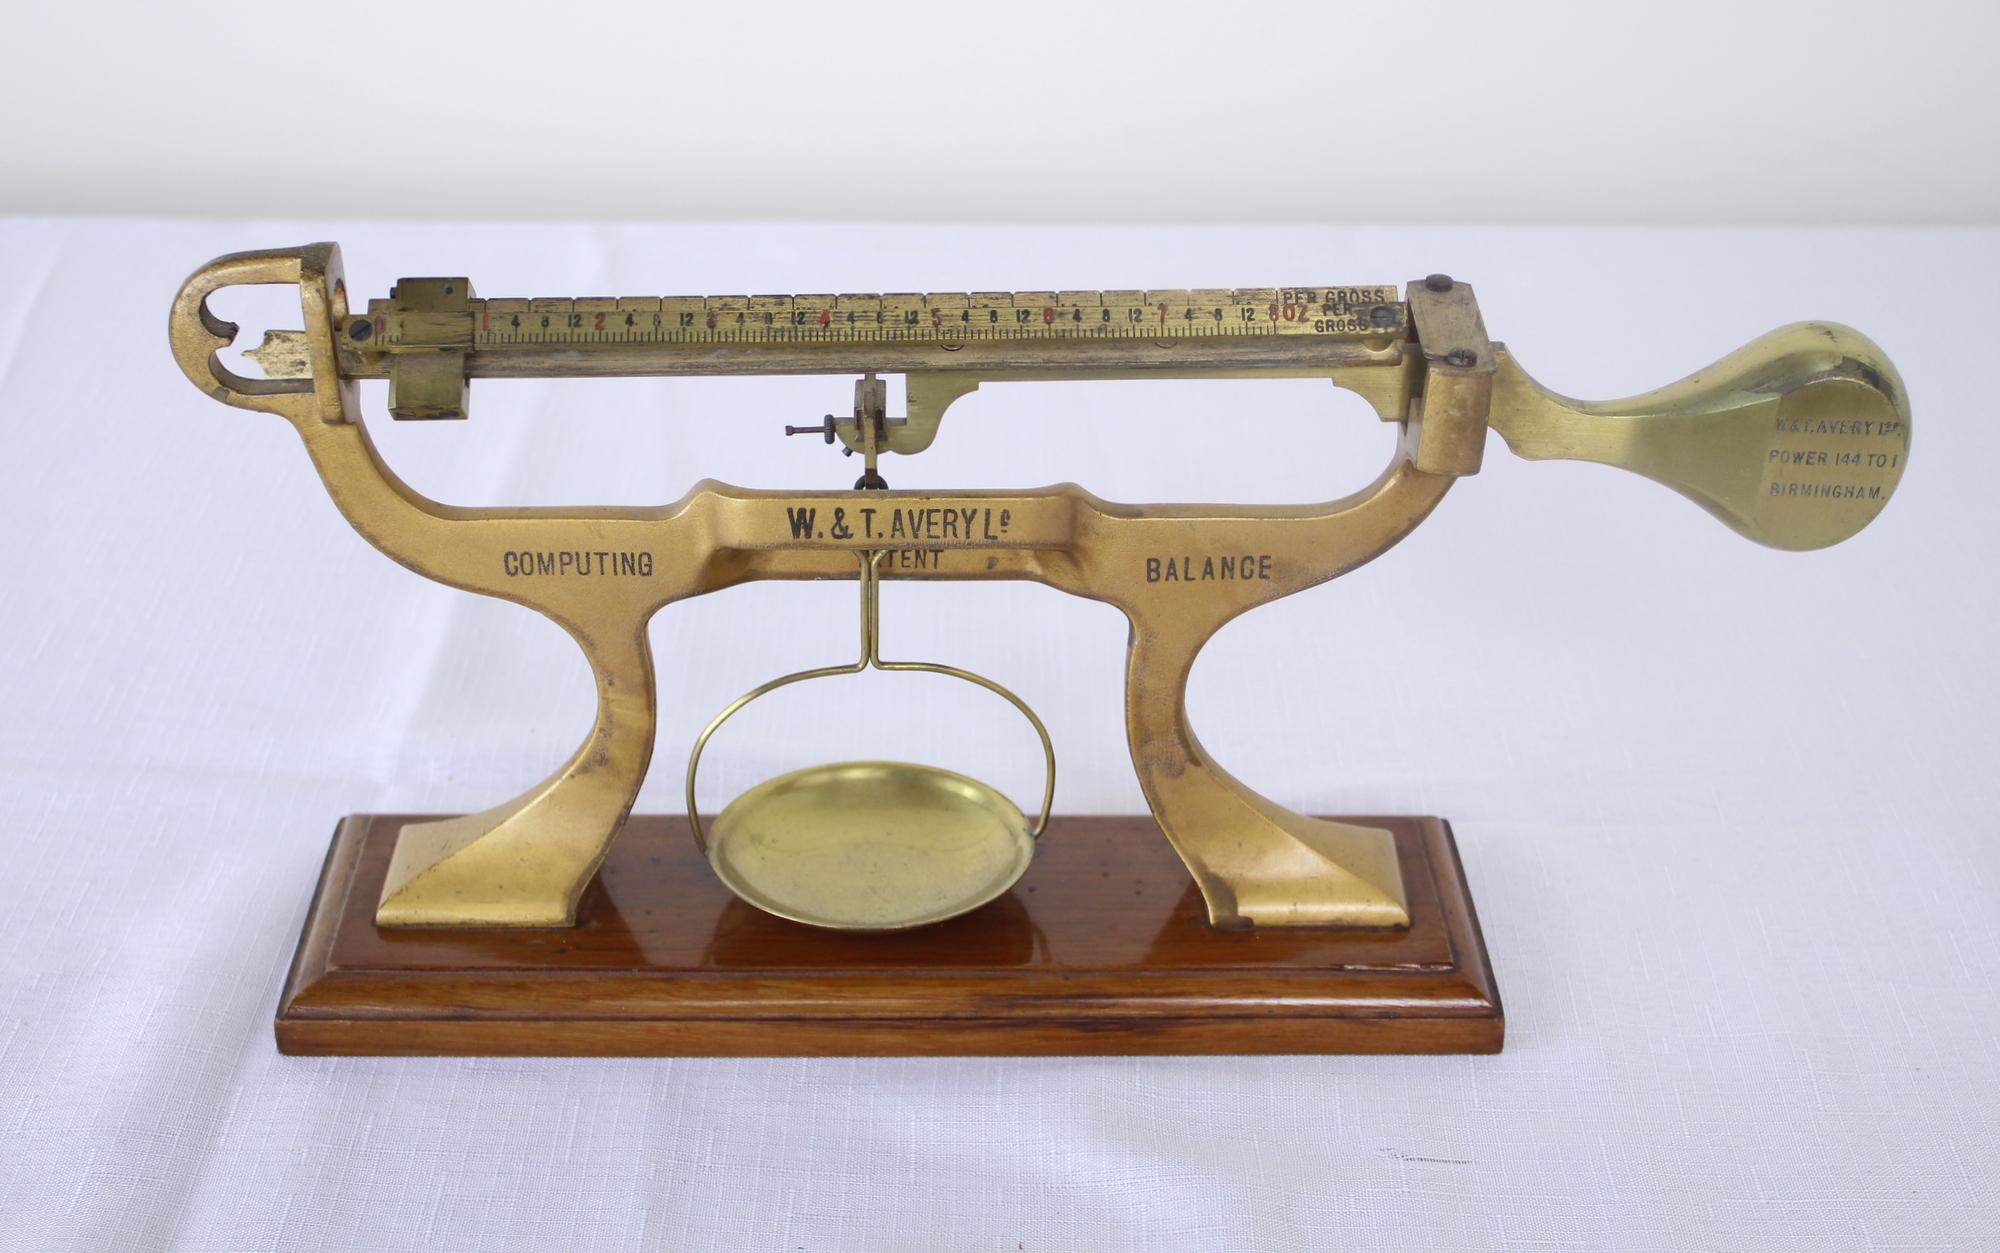 A finely detailed Victorian brass scale by W & T Avery, the finest scale makers of the time. Possibly used to weigh gold. Good brass details and the entire piece is in good antique condition. Sold without weights.